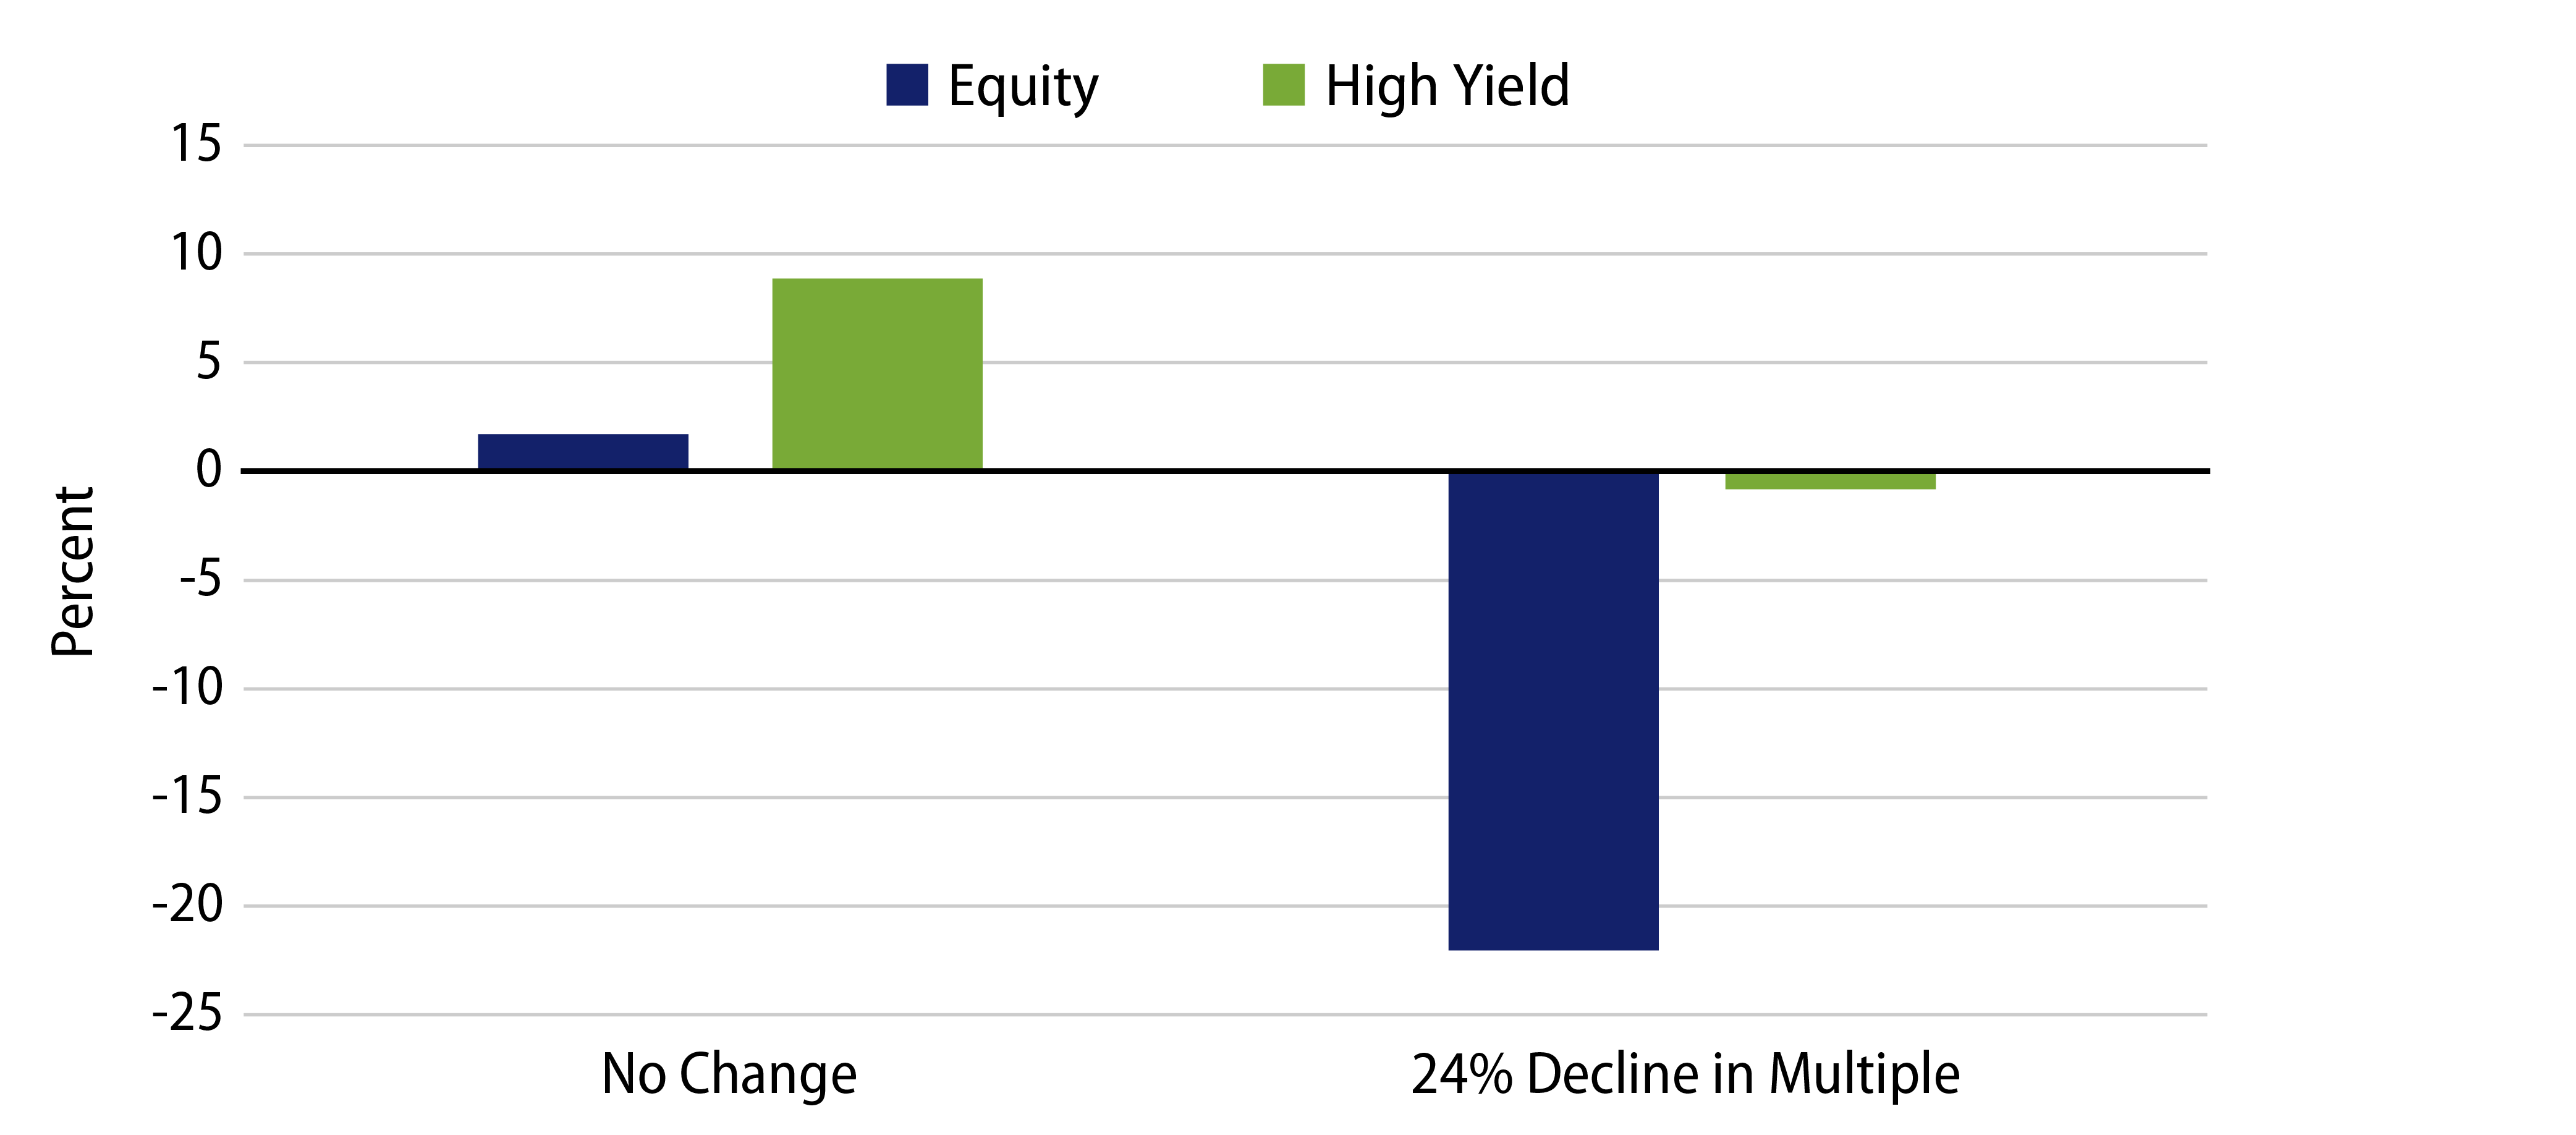 High-Yield Outcomes Look Attractive vs. Equity